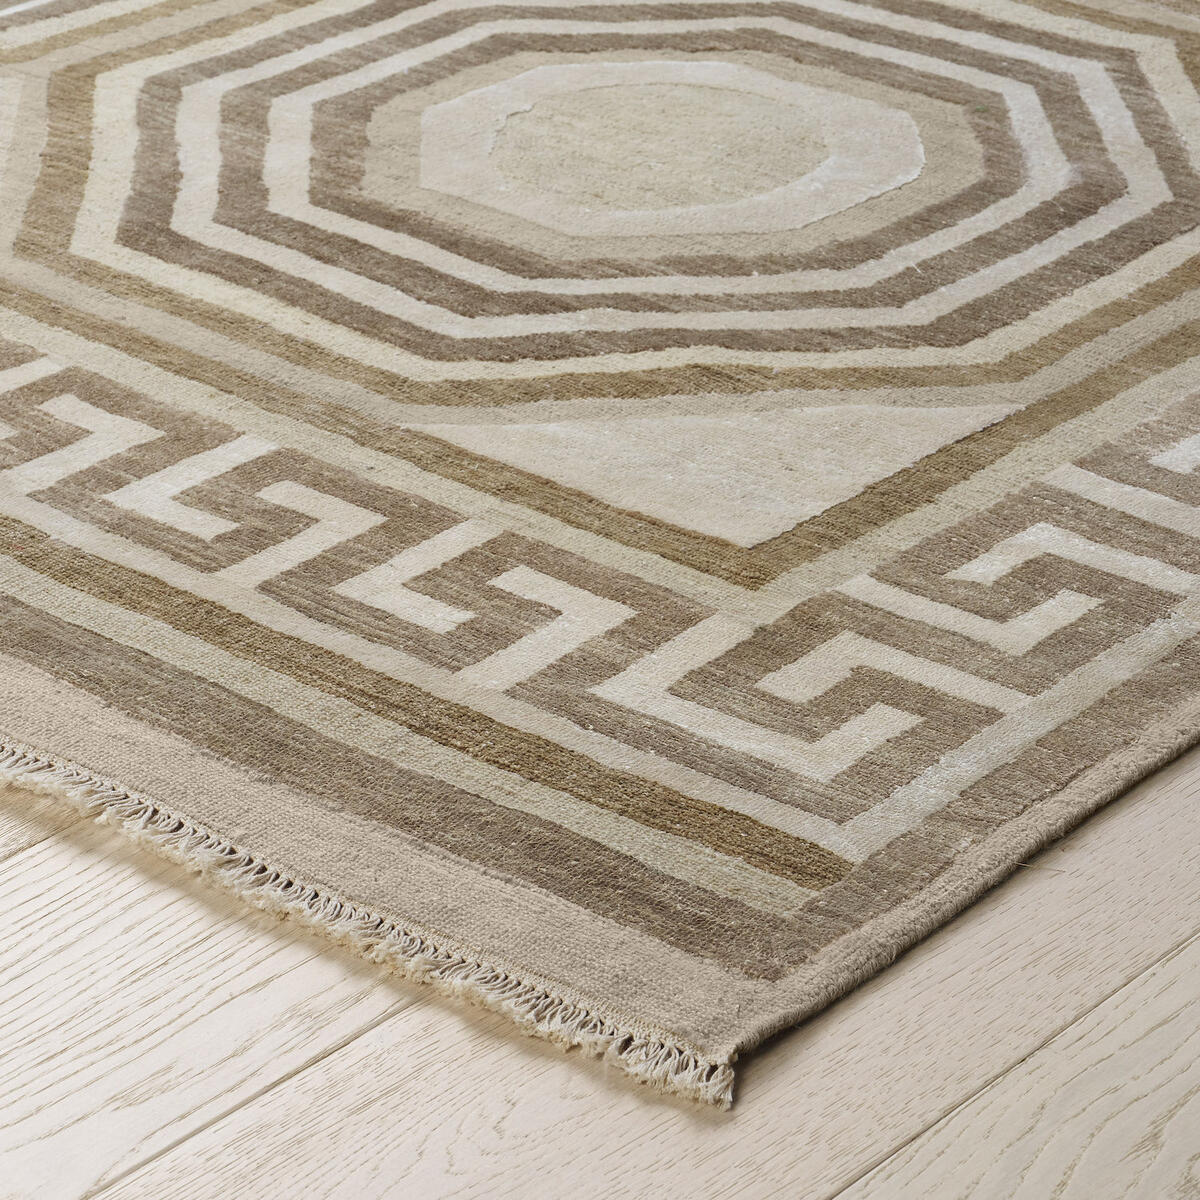 Riviera rug in Natural by Mary McDonald for Patterson Flynn